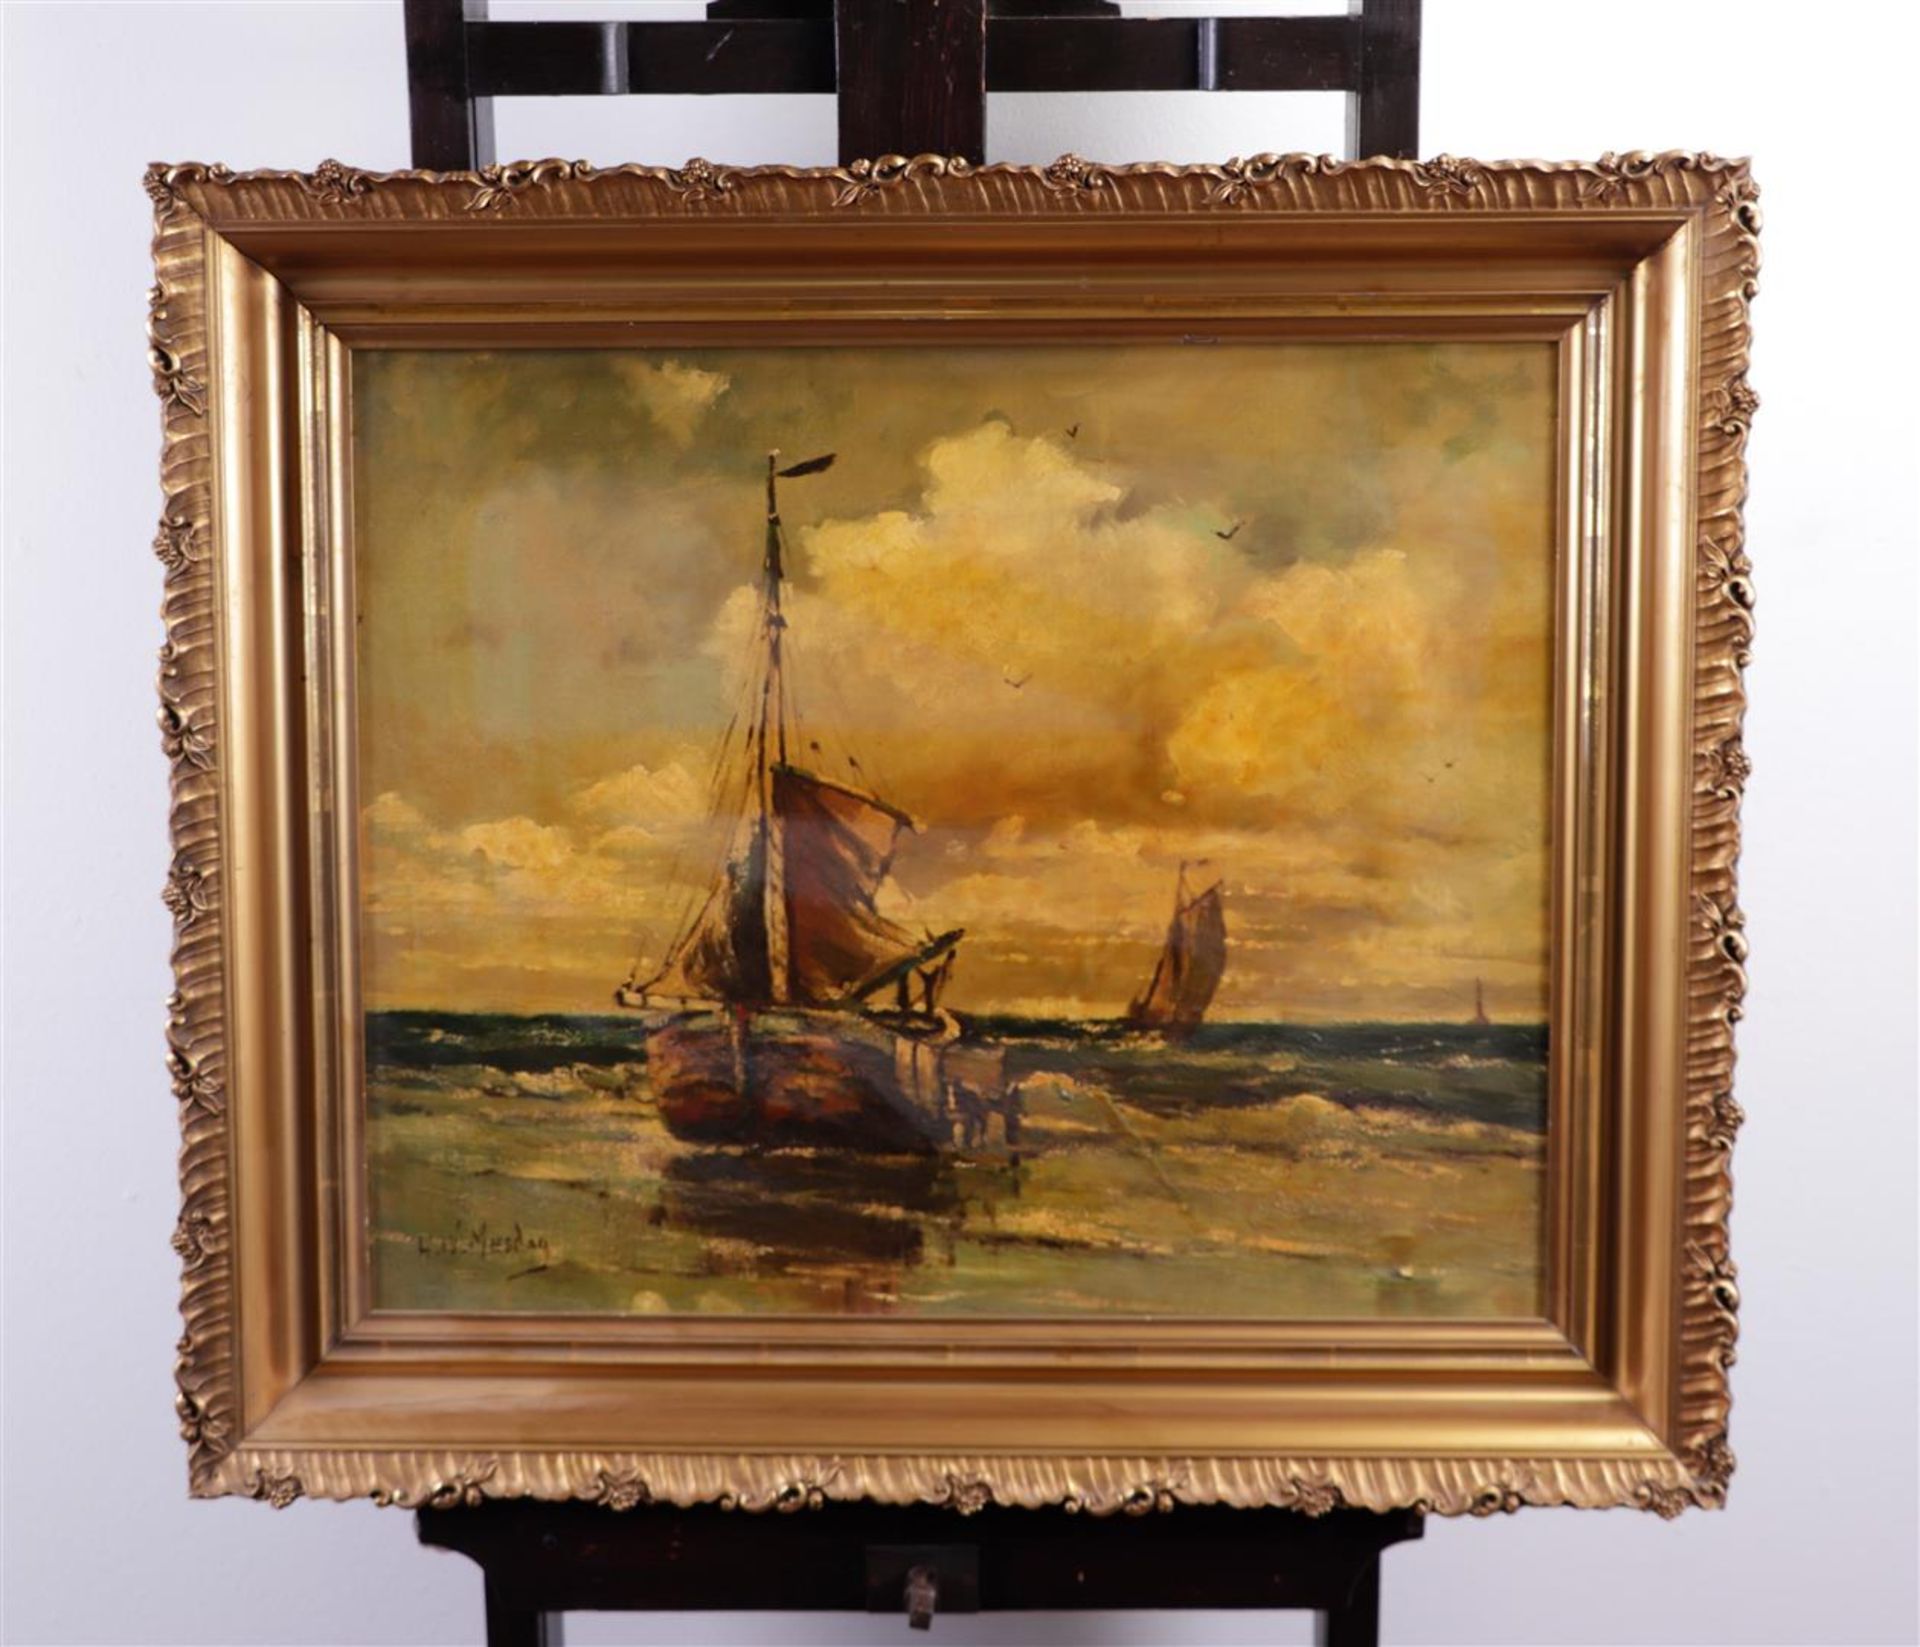 Dutch School, 20th century, signed H.W. Mesdag, Bomb barges in the surf, oil on panel,
50 x 55 cm. - Bild 2 aus 4